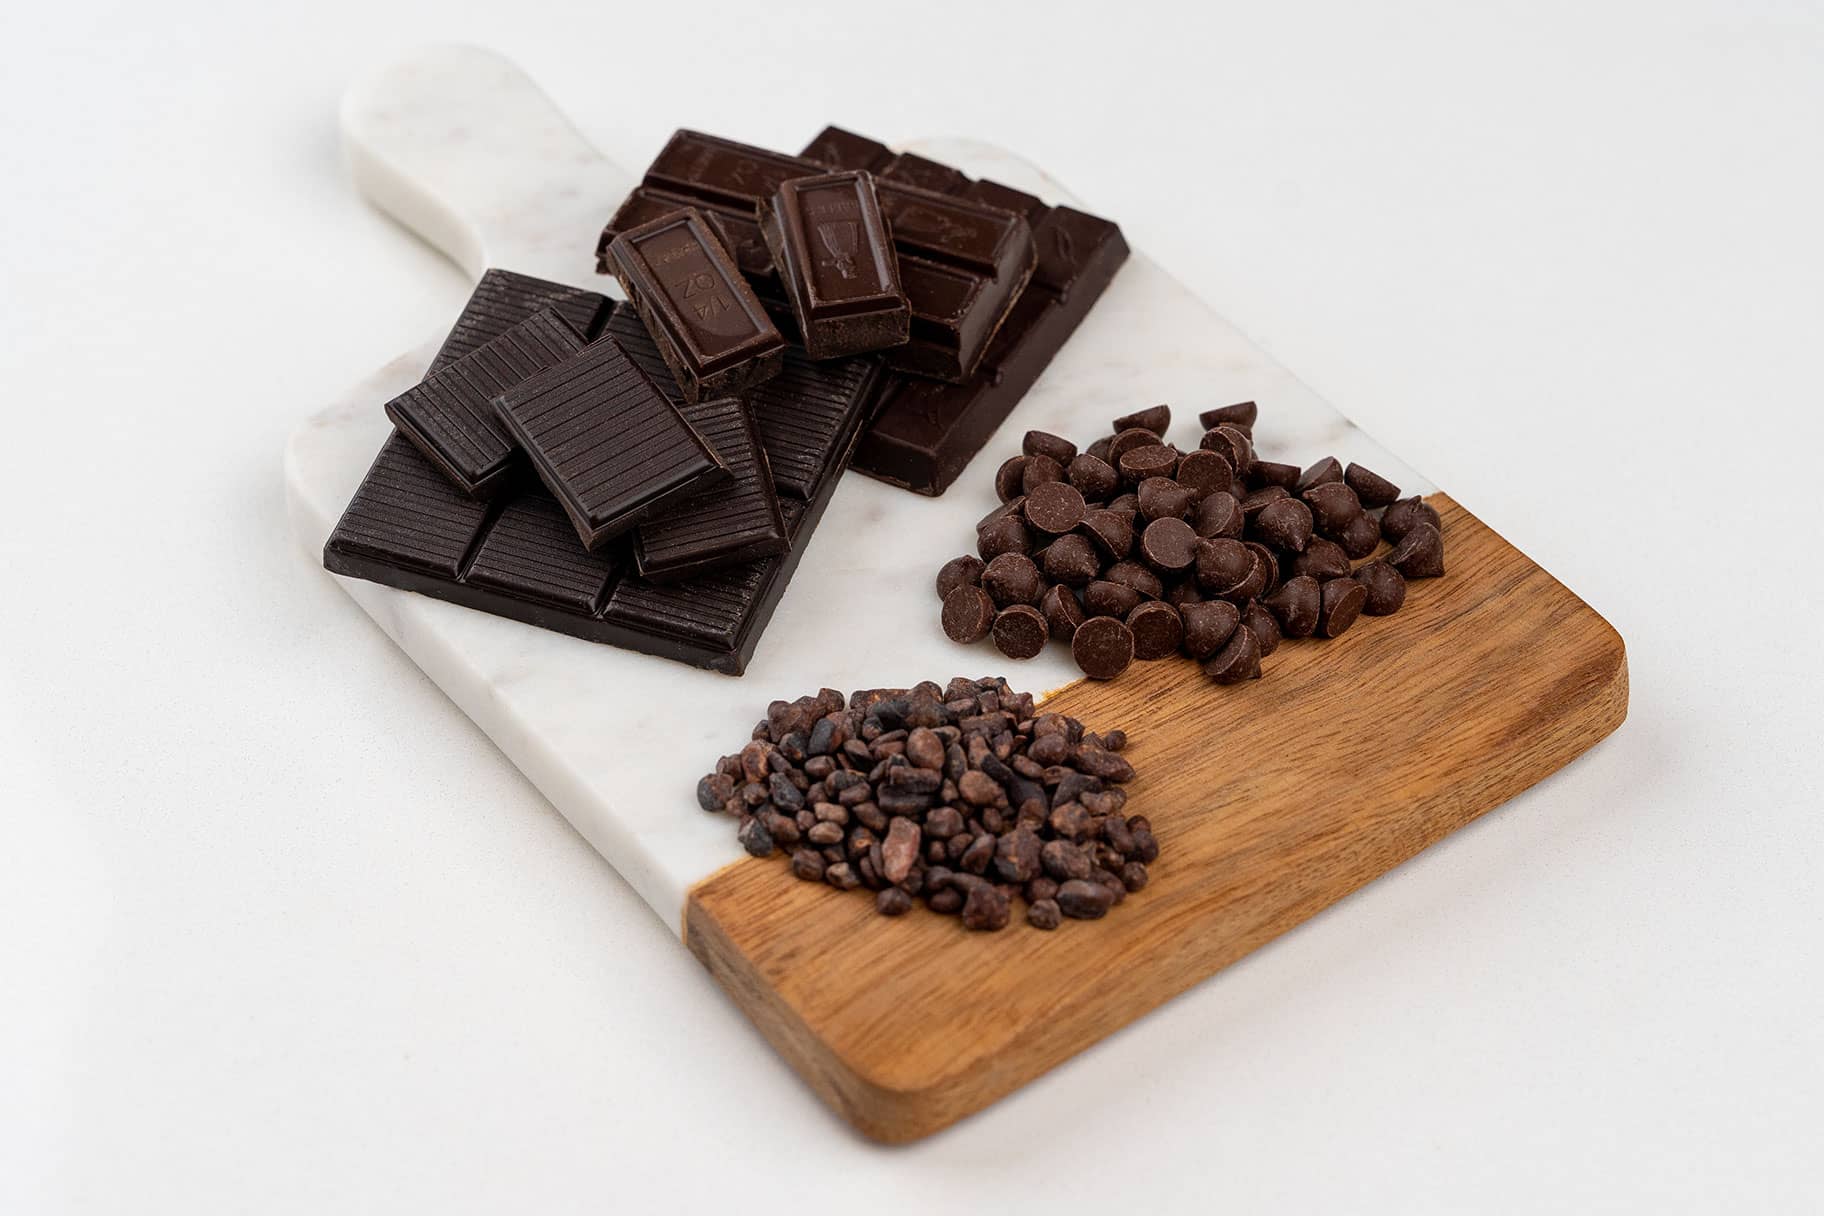 3 Health Benefits of Dark Chocolate, According to a Registered Dietitian 